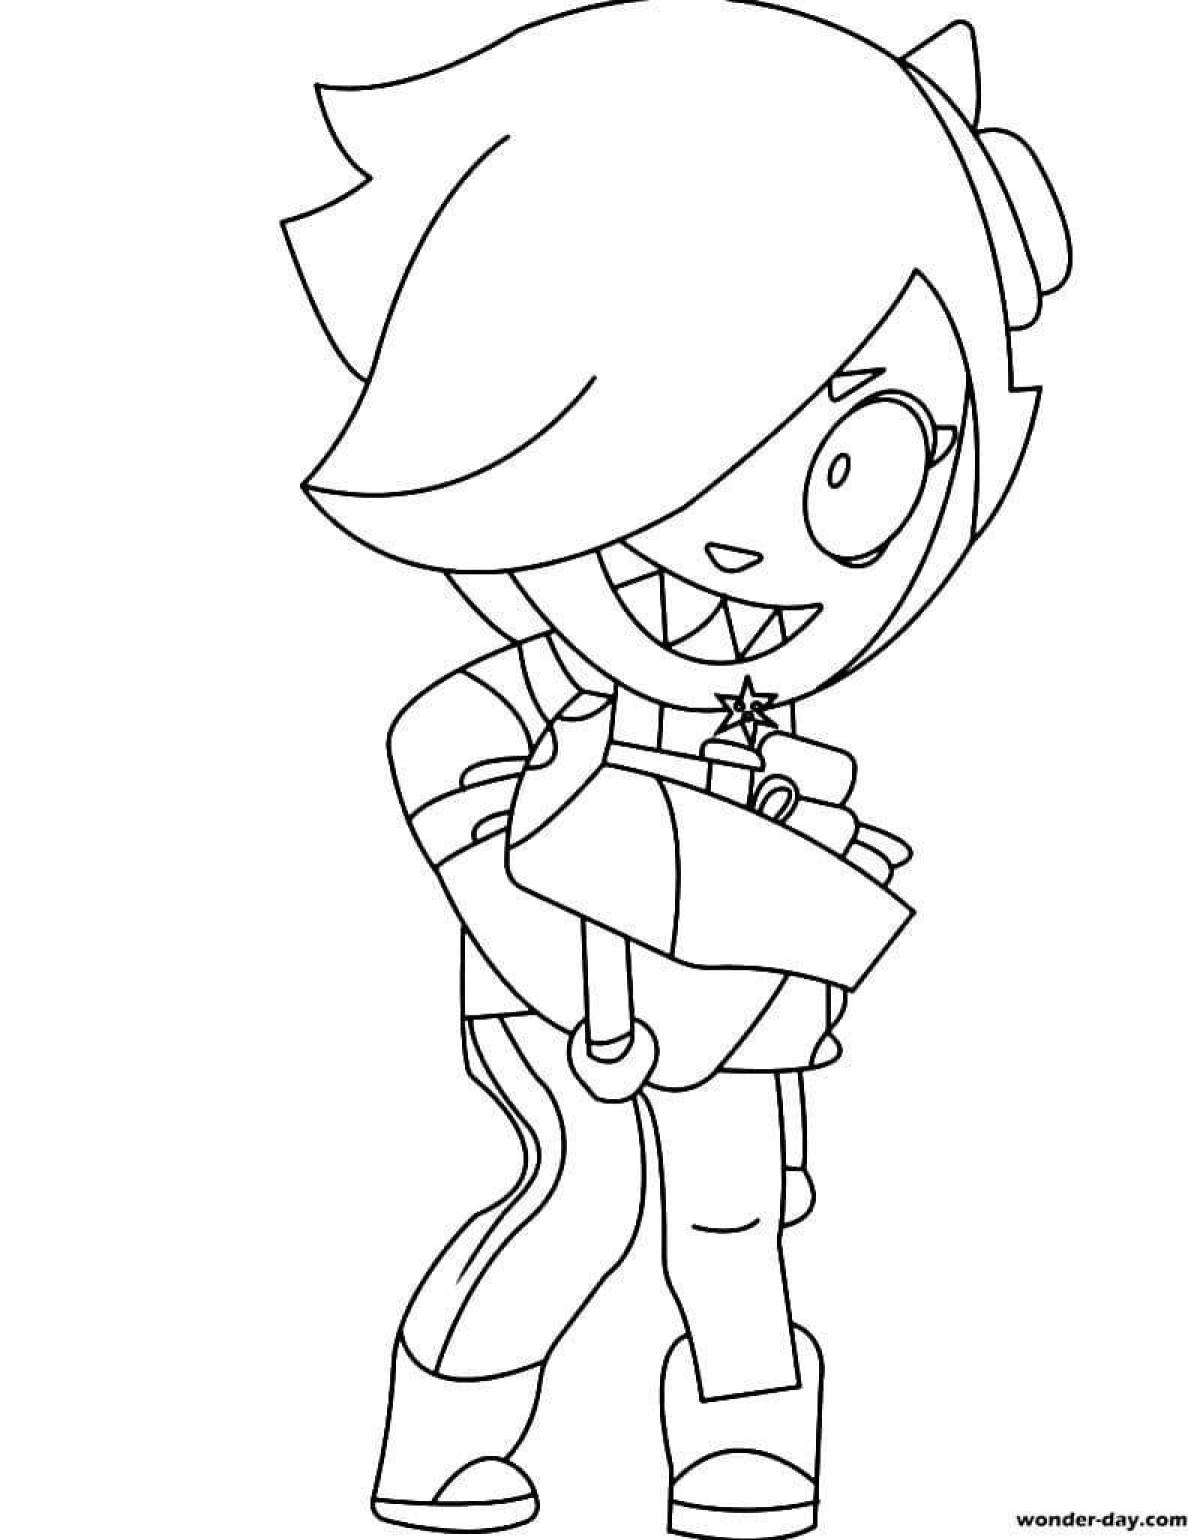 Attractive brawl stars character coloring pages